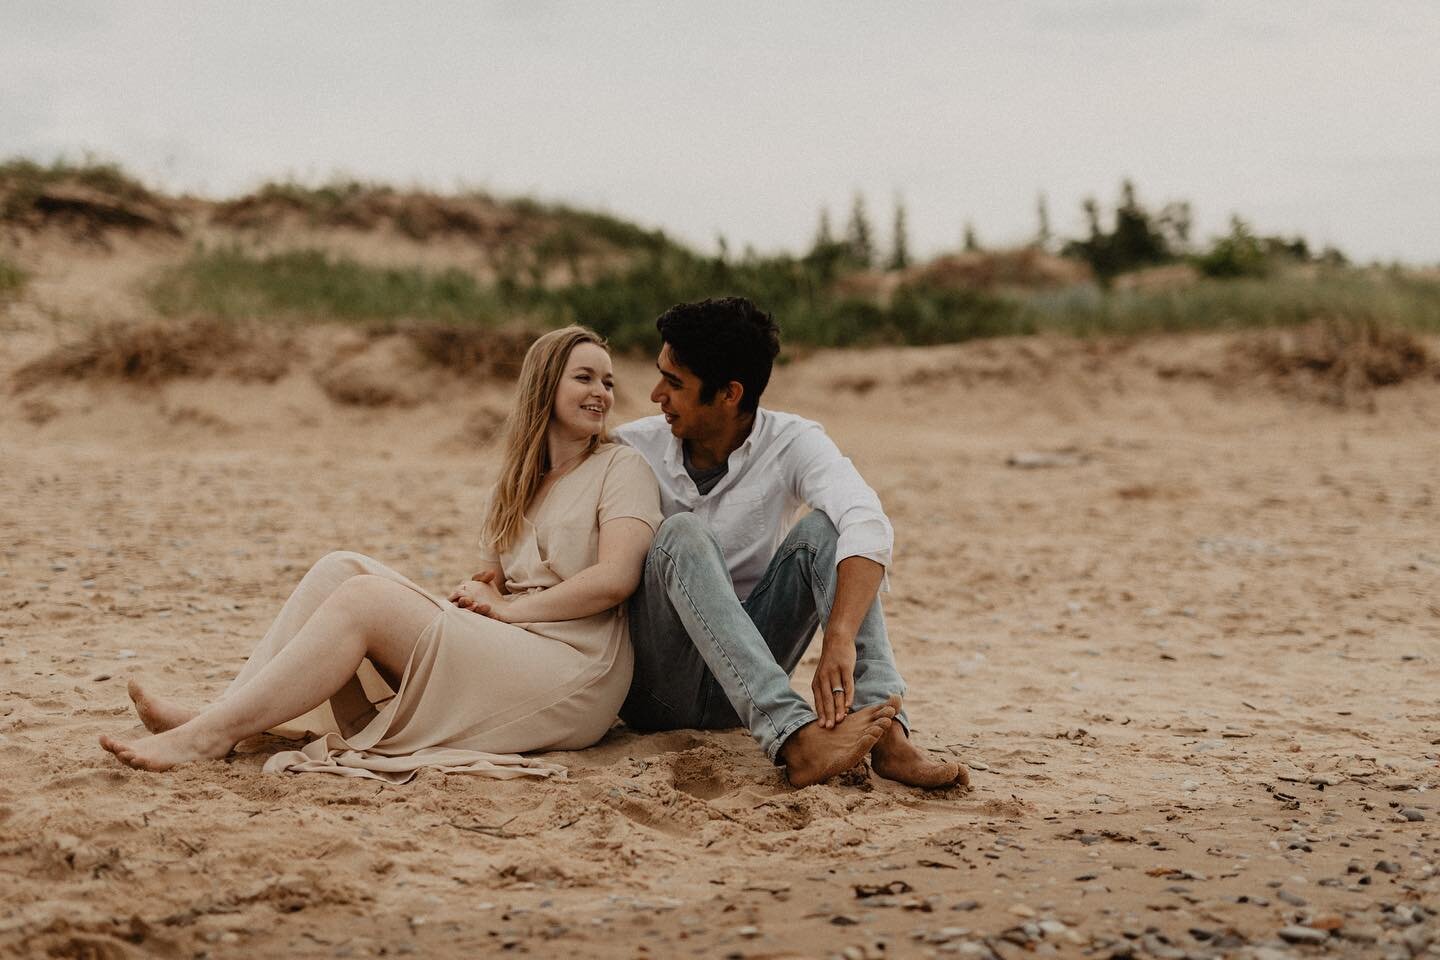 Playing at the beach at 9pm, with storm clouds over our heads and happy hearts was an amazing way to spend an evening 🖤

Here&rsquo;s is the tiniest peek into this session!